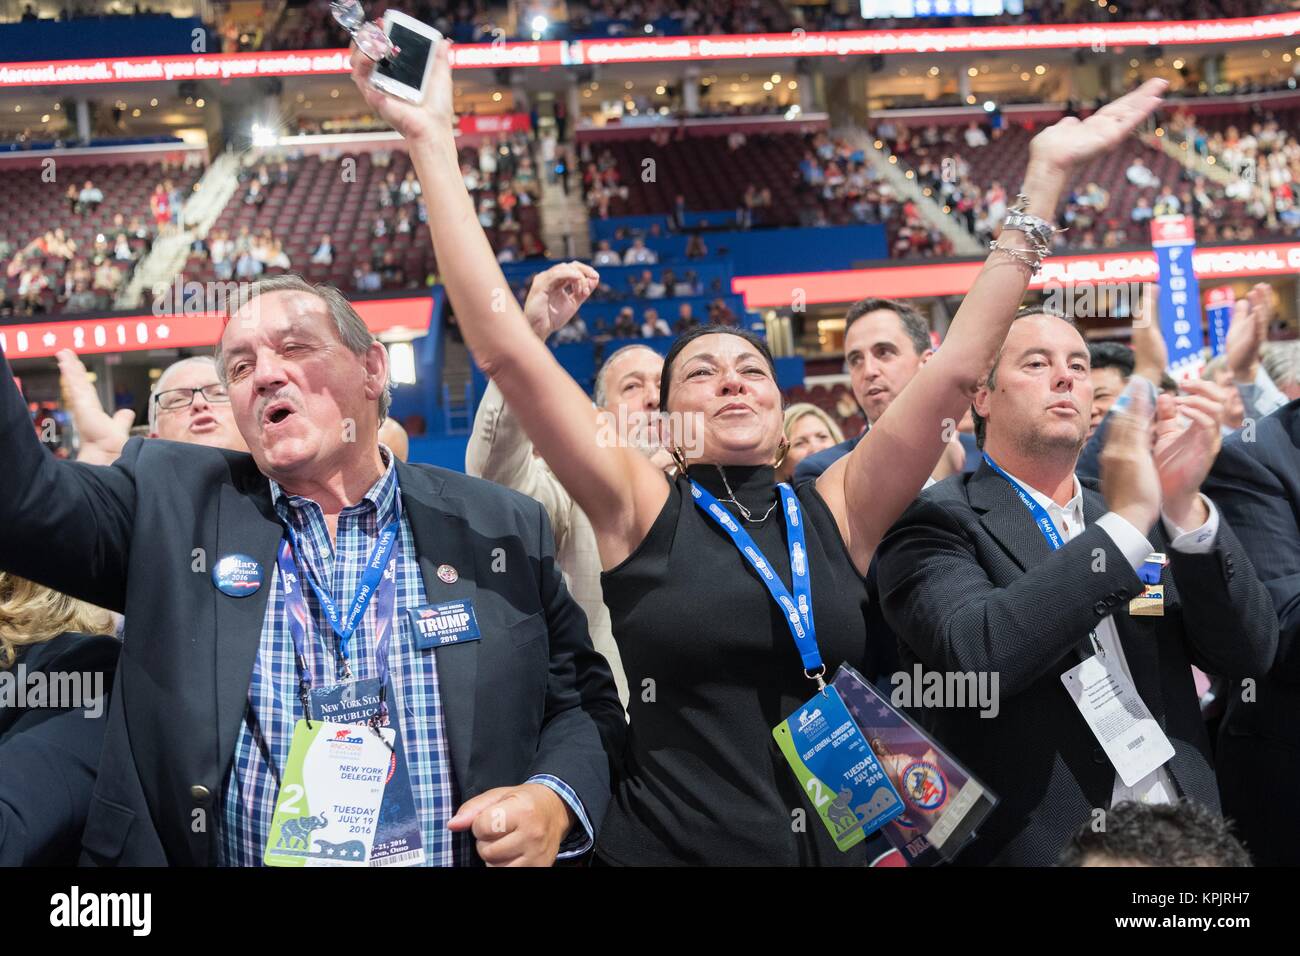 New York delegates celebrate the nomination of Donald Trump during the second day of the Republican National Convention July 19, 2016 in Cleveland, Ohio. The delegates formally nominated Donald J. Trump for president after a state by state roll call. Stock Photo